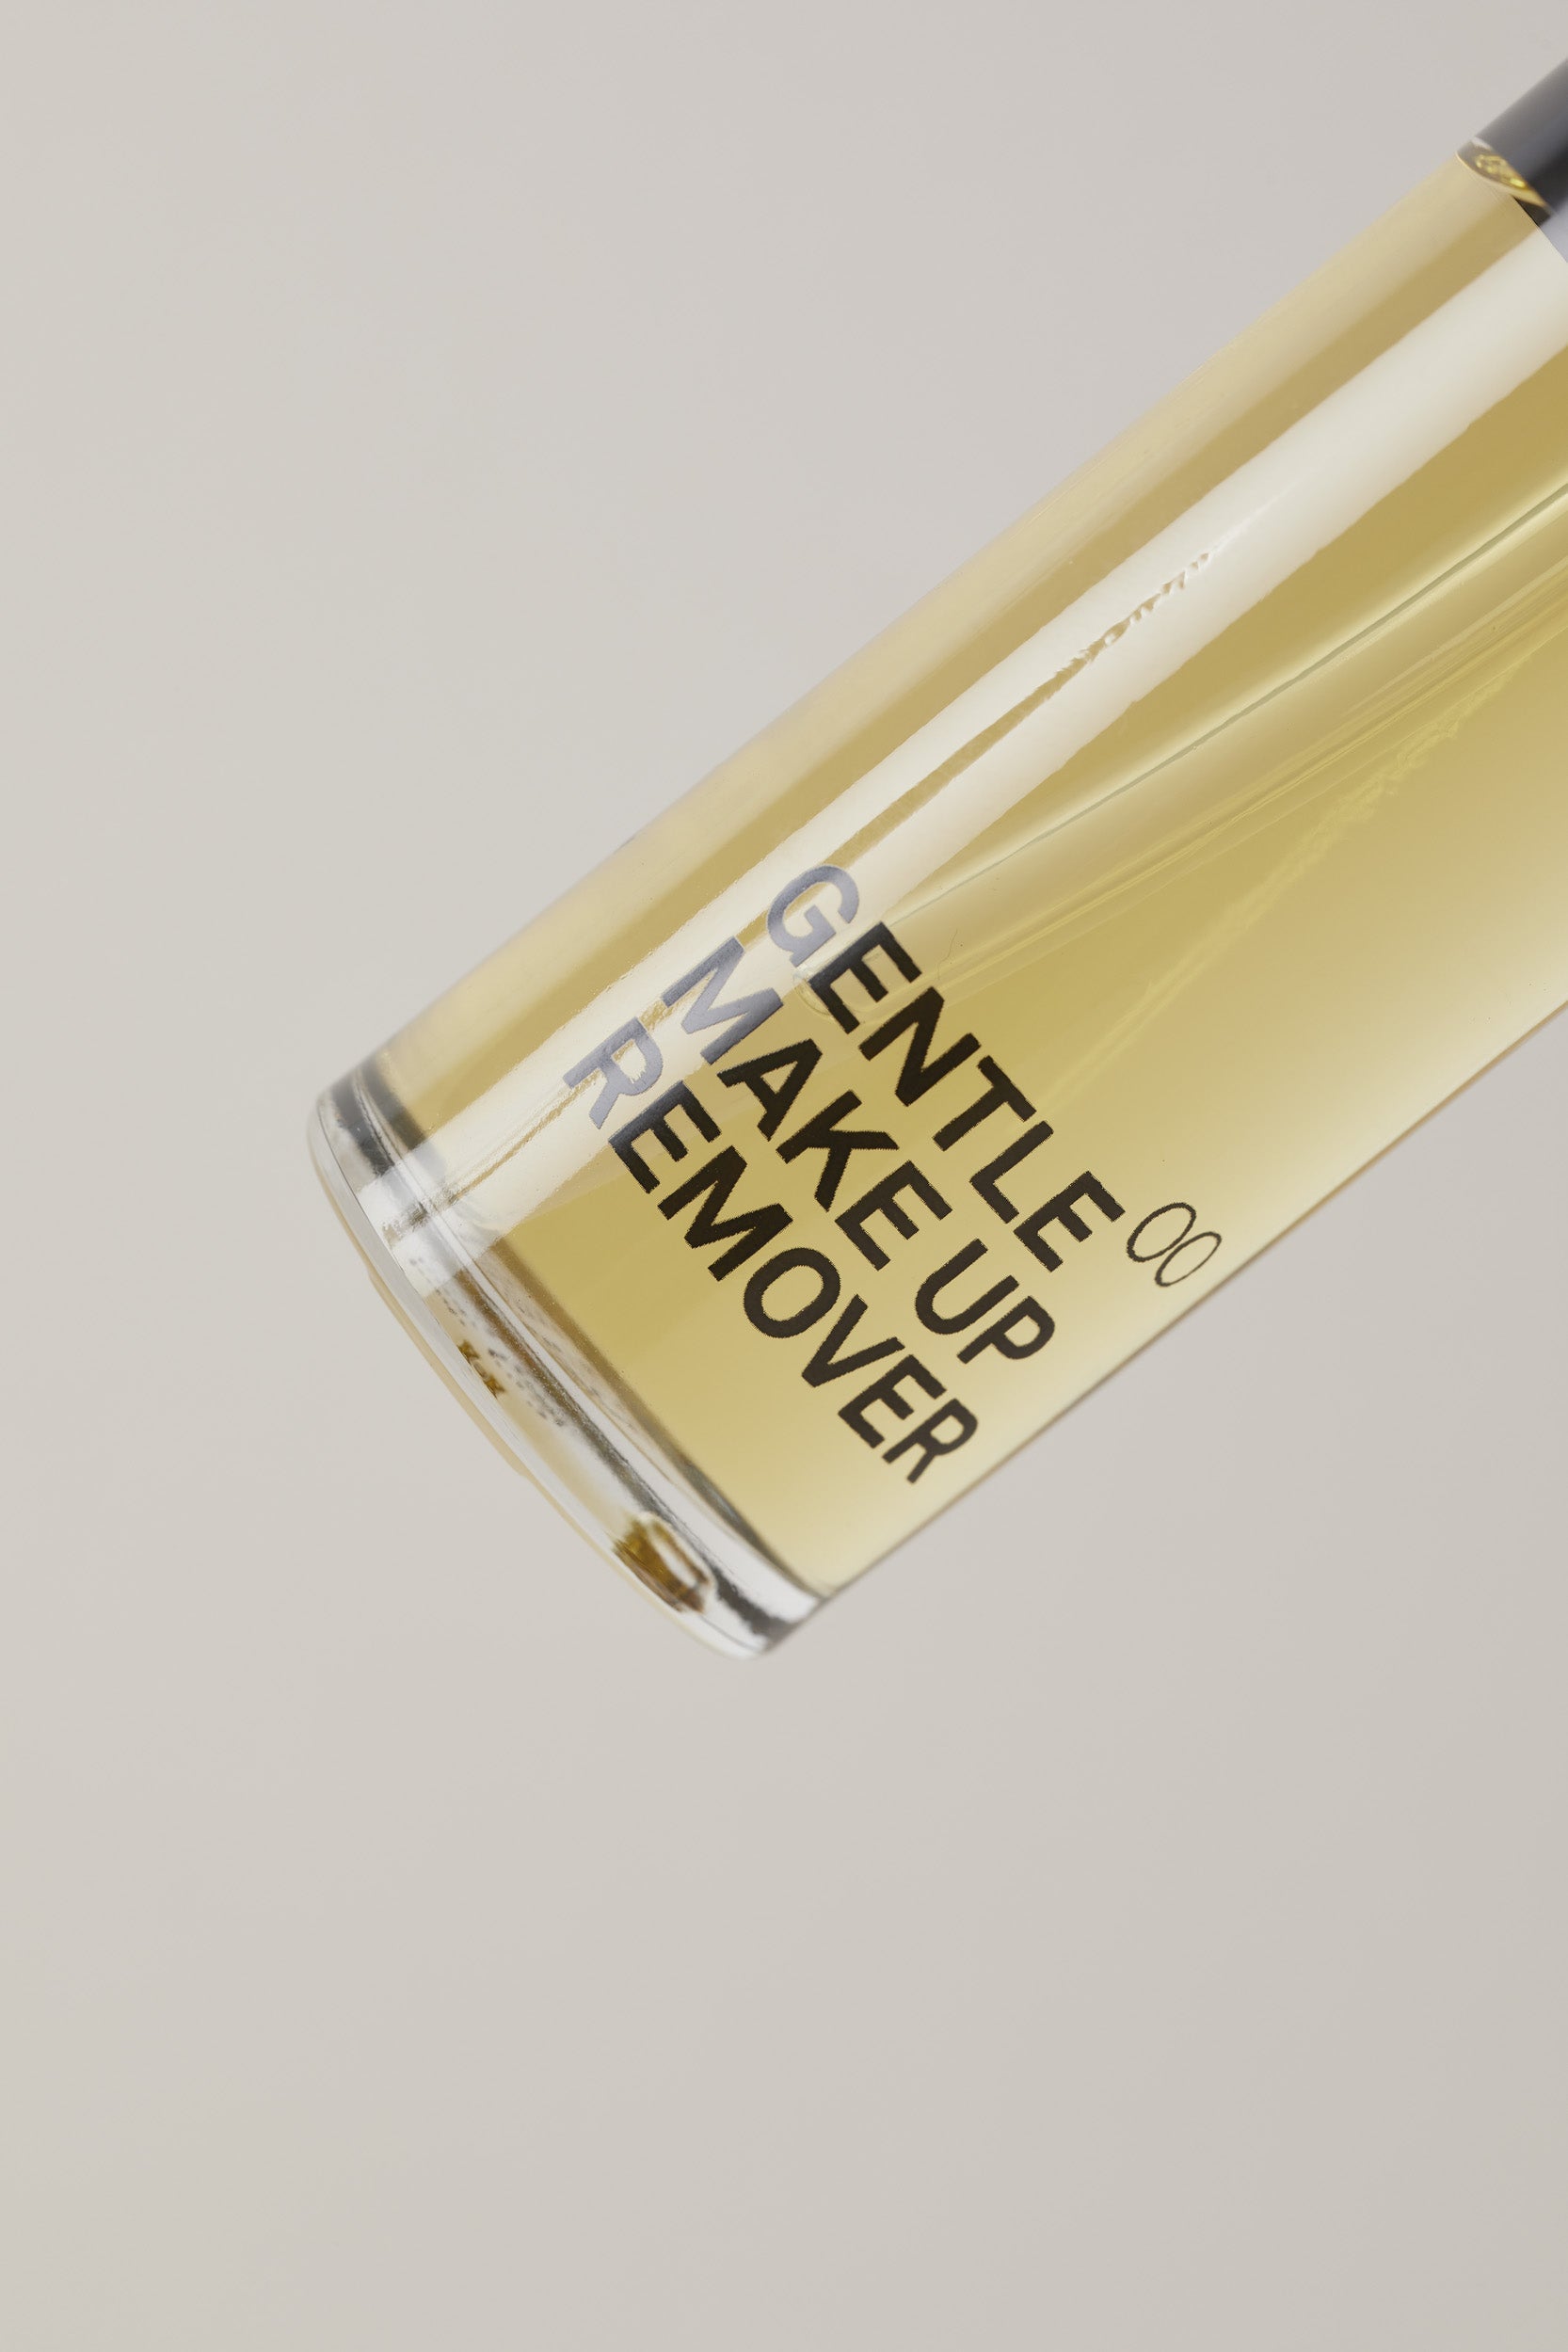 00 Gentle Cleansing Oil (Gentle Make-up Remover)